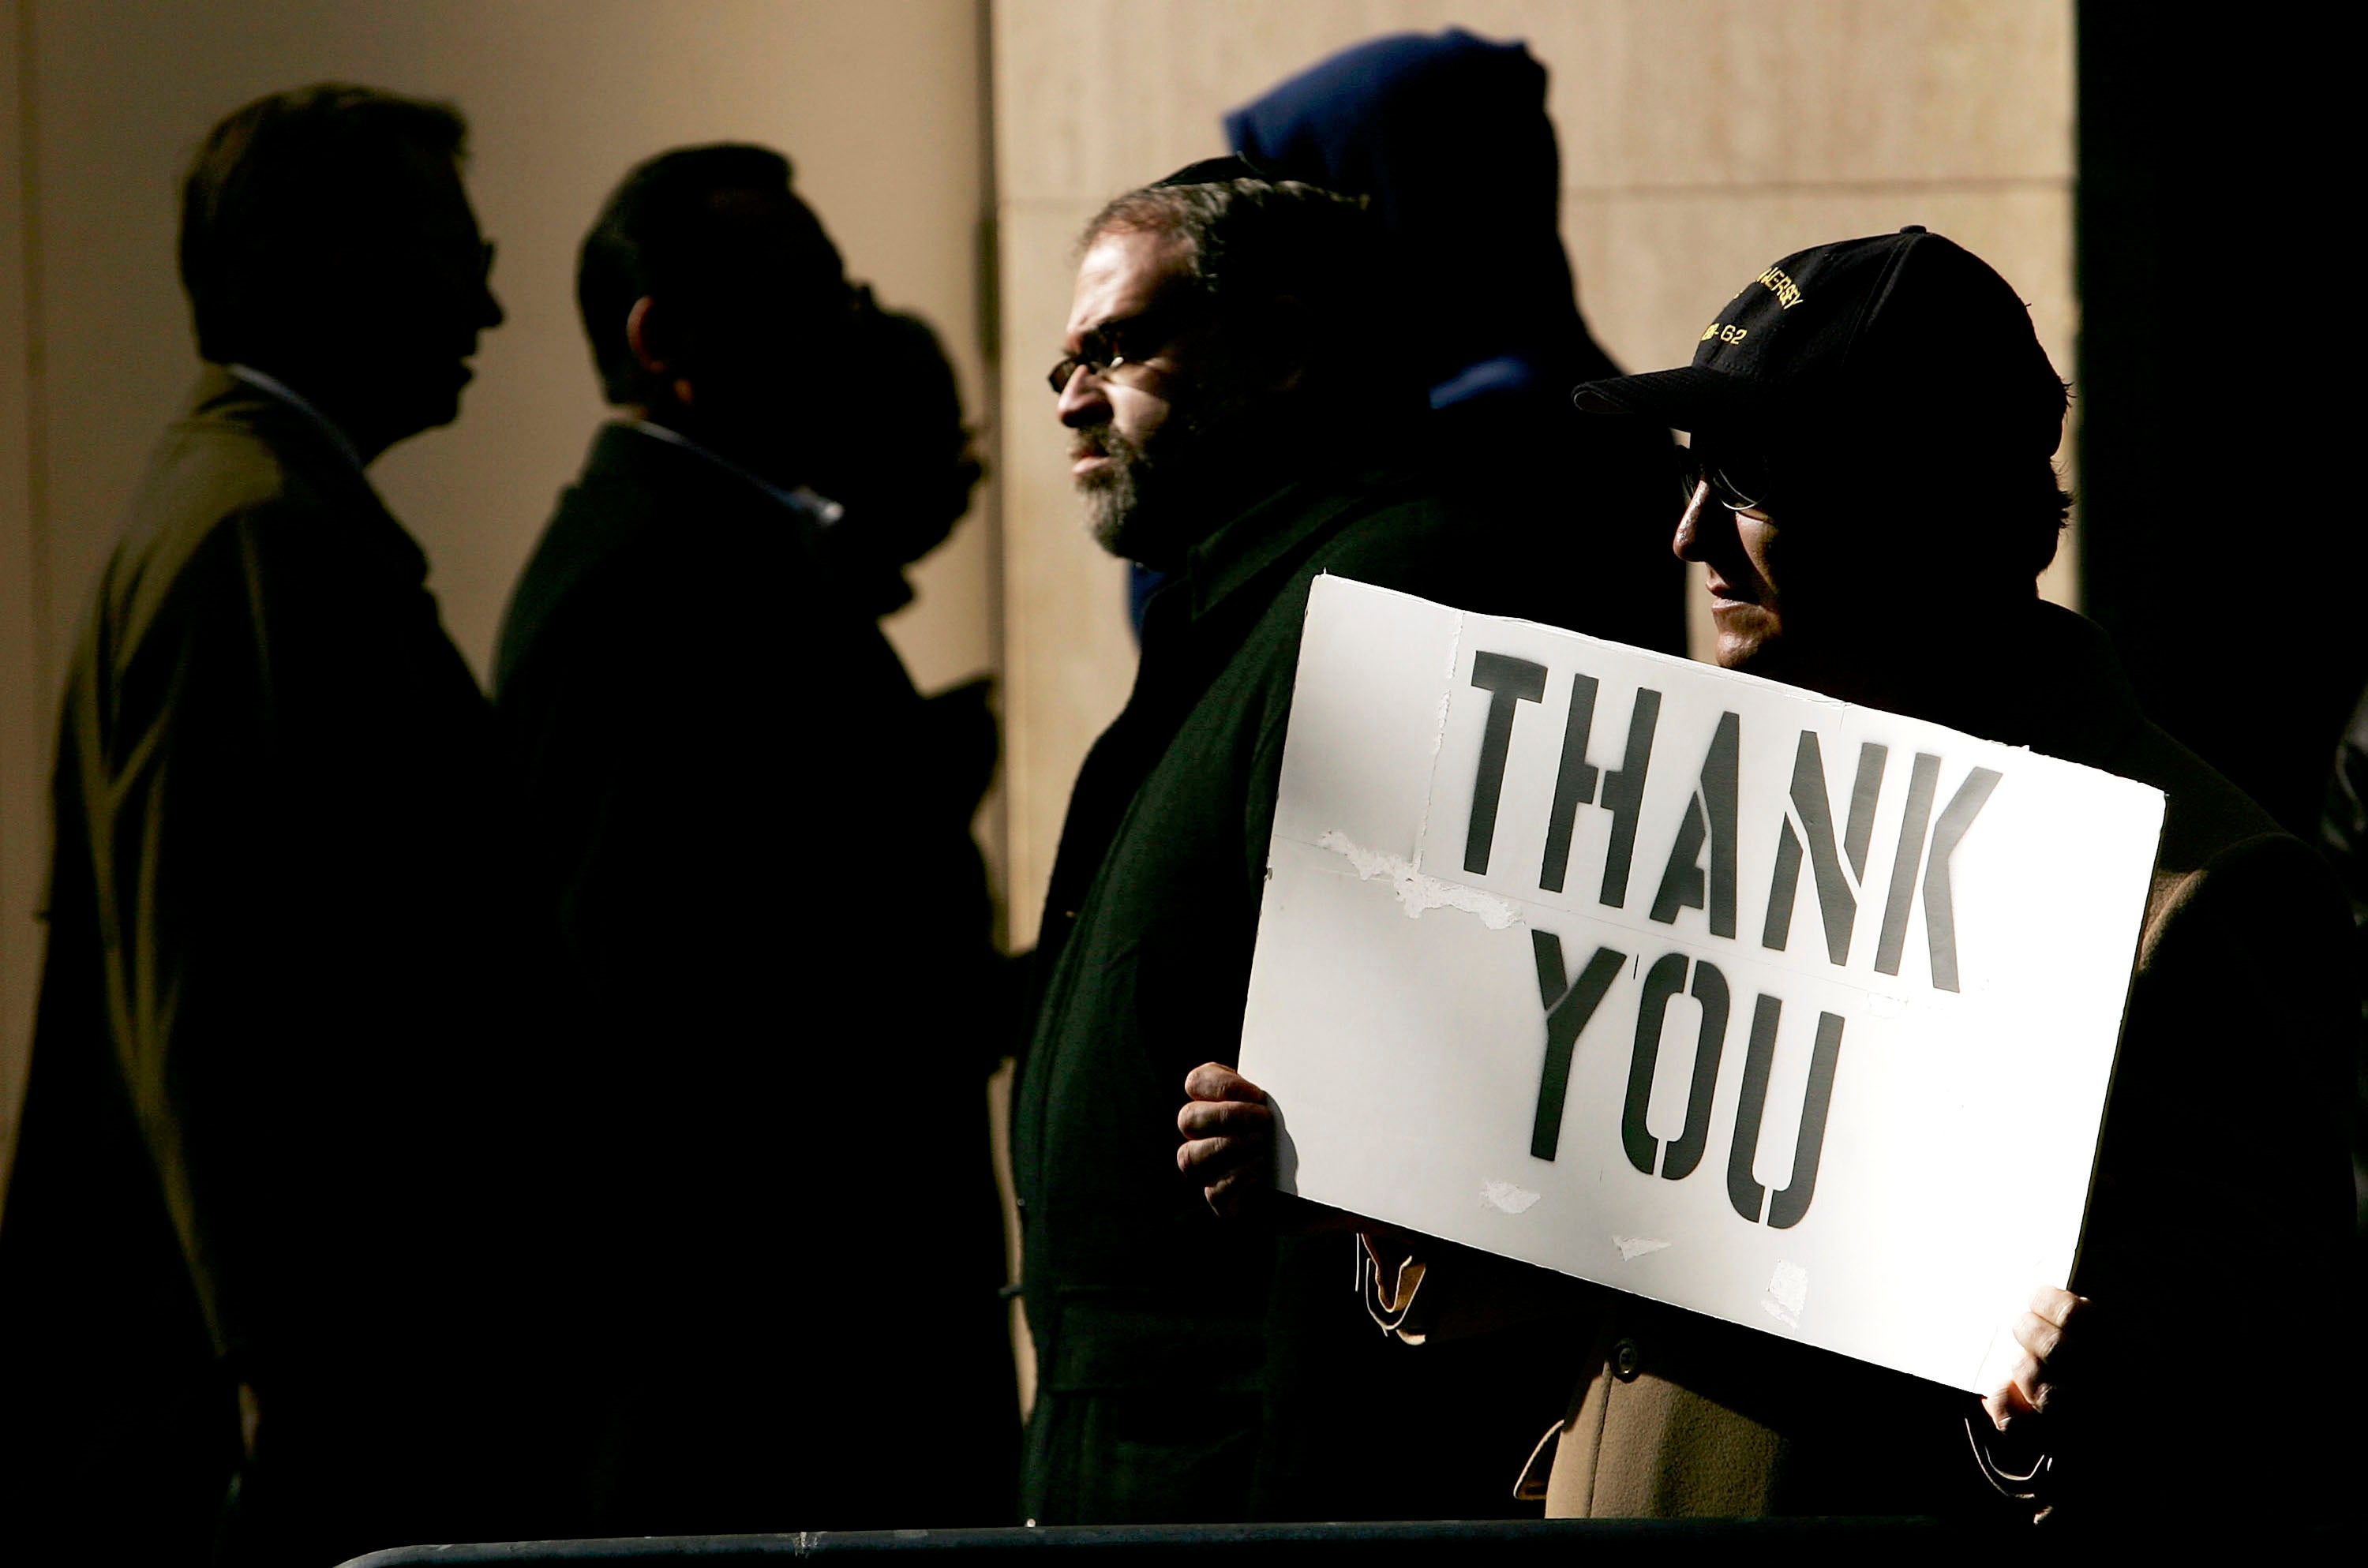 UK adults saying thank you don’t always mean it